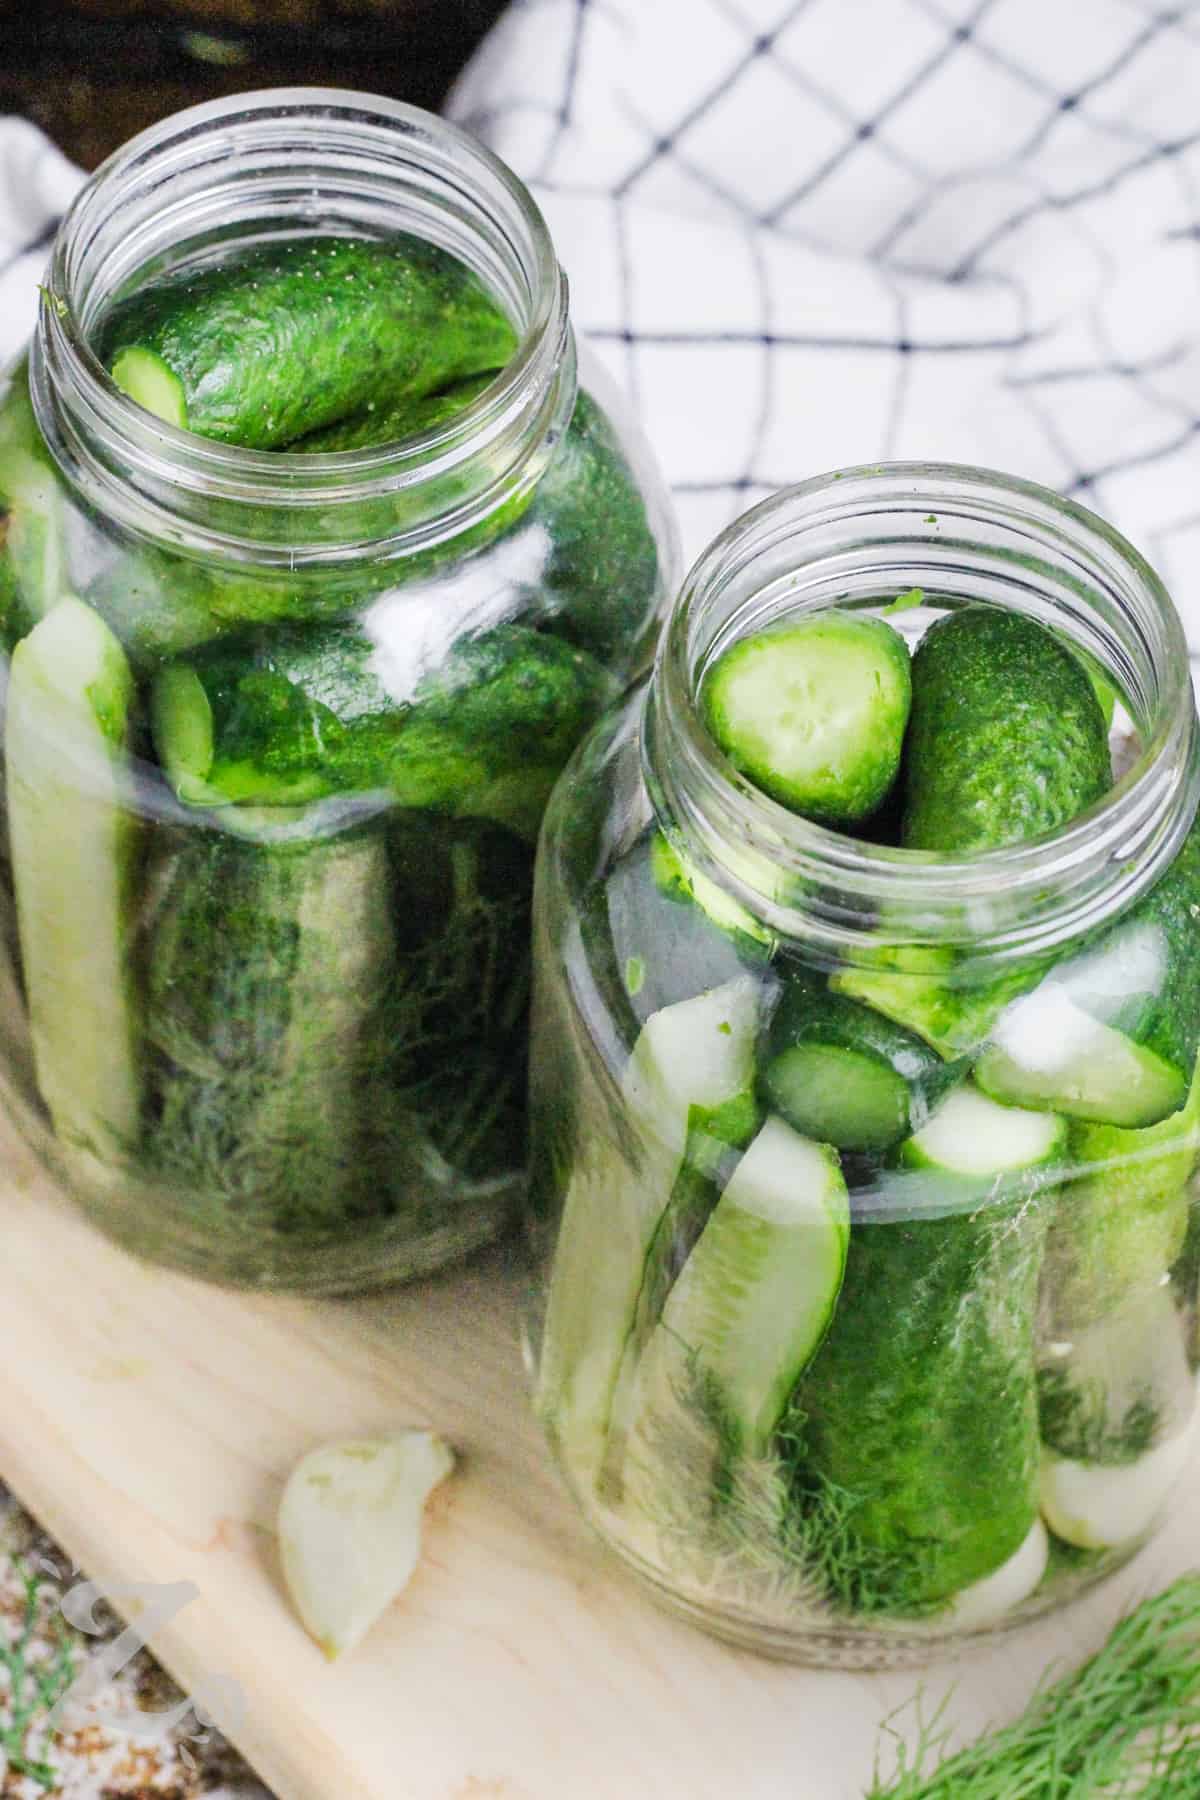 Dill pickles prepped in a jar.